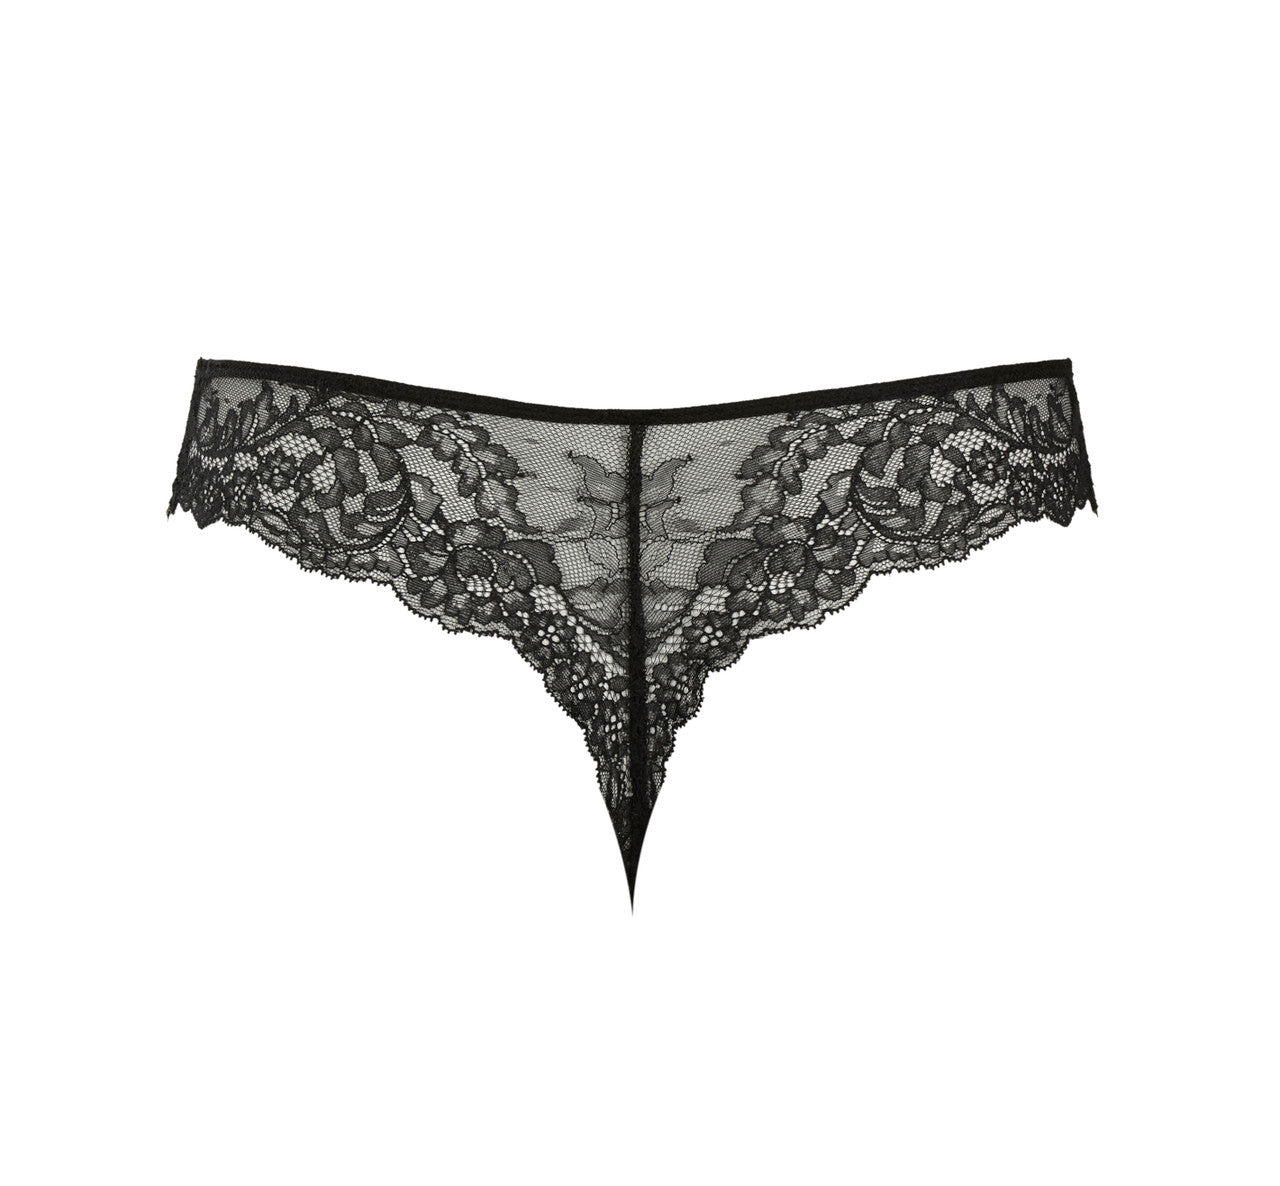 Panache Ana Thong in black stretch lace is shown in a back view product shot.